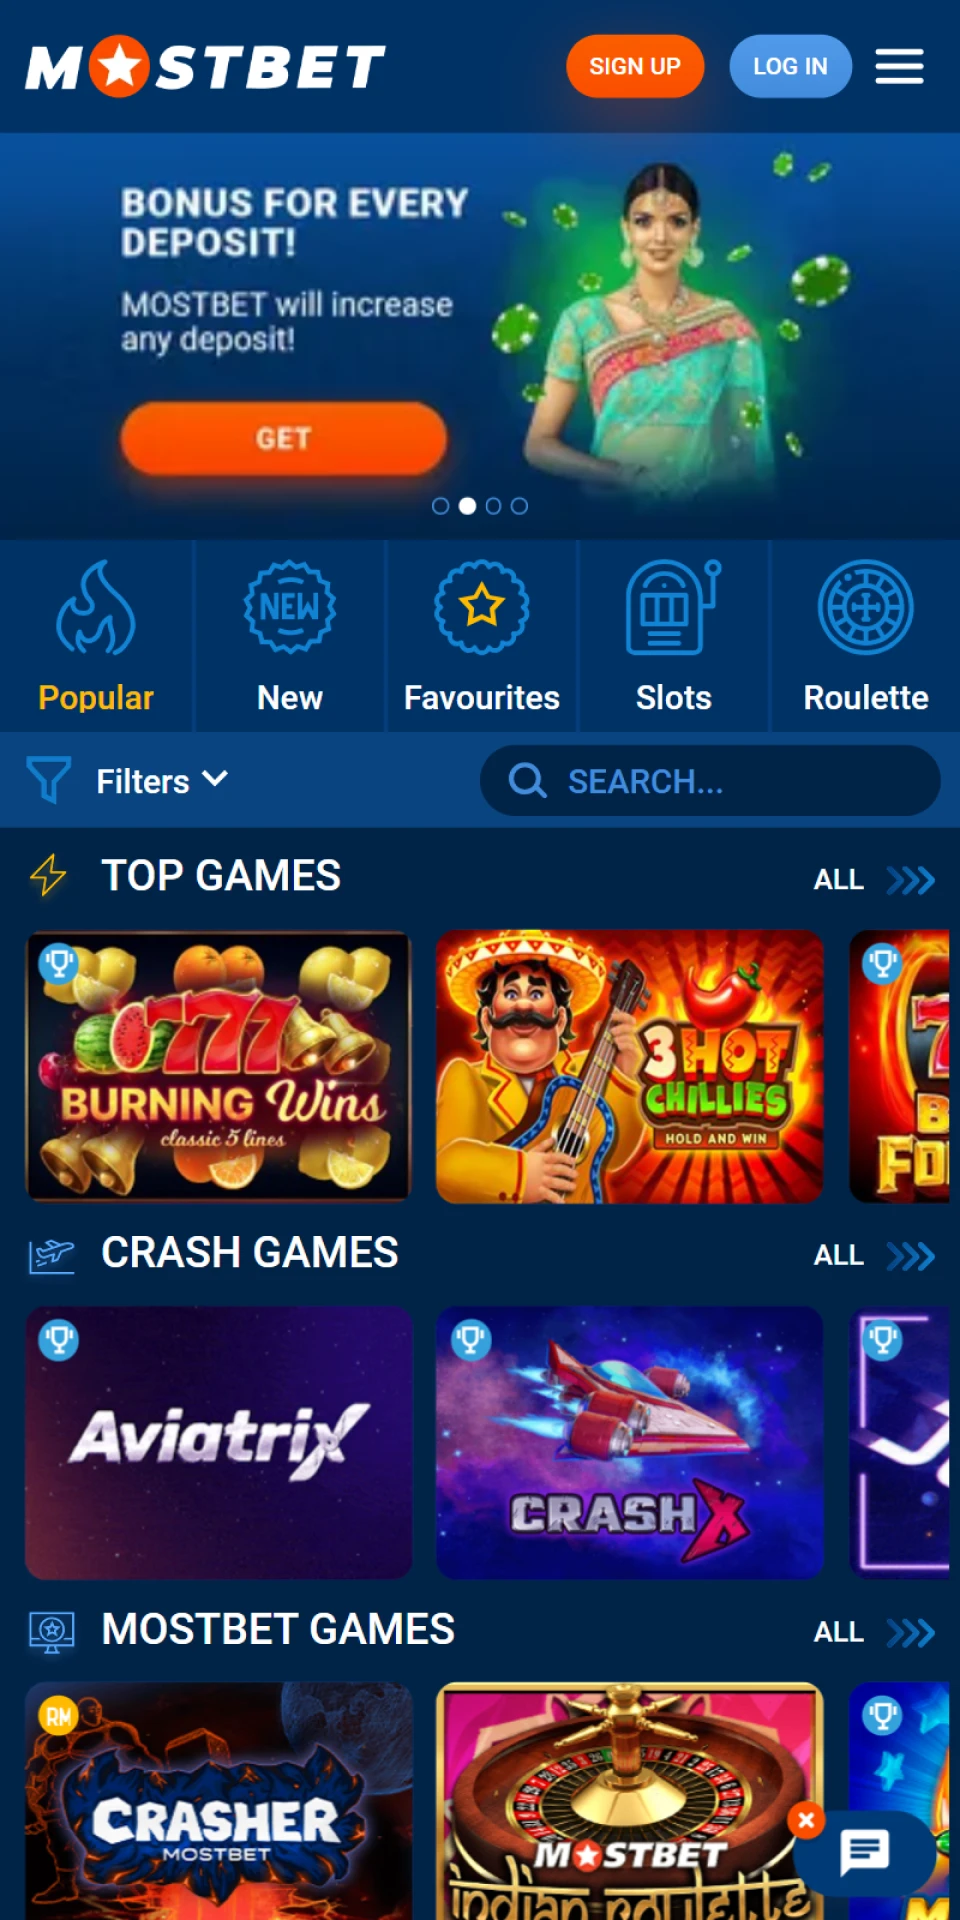 The Mostbet mobile app has many popular casino games.